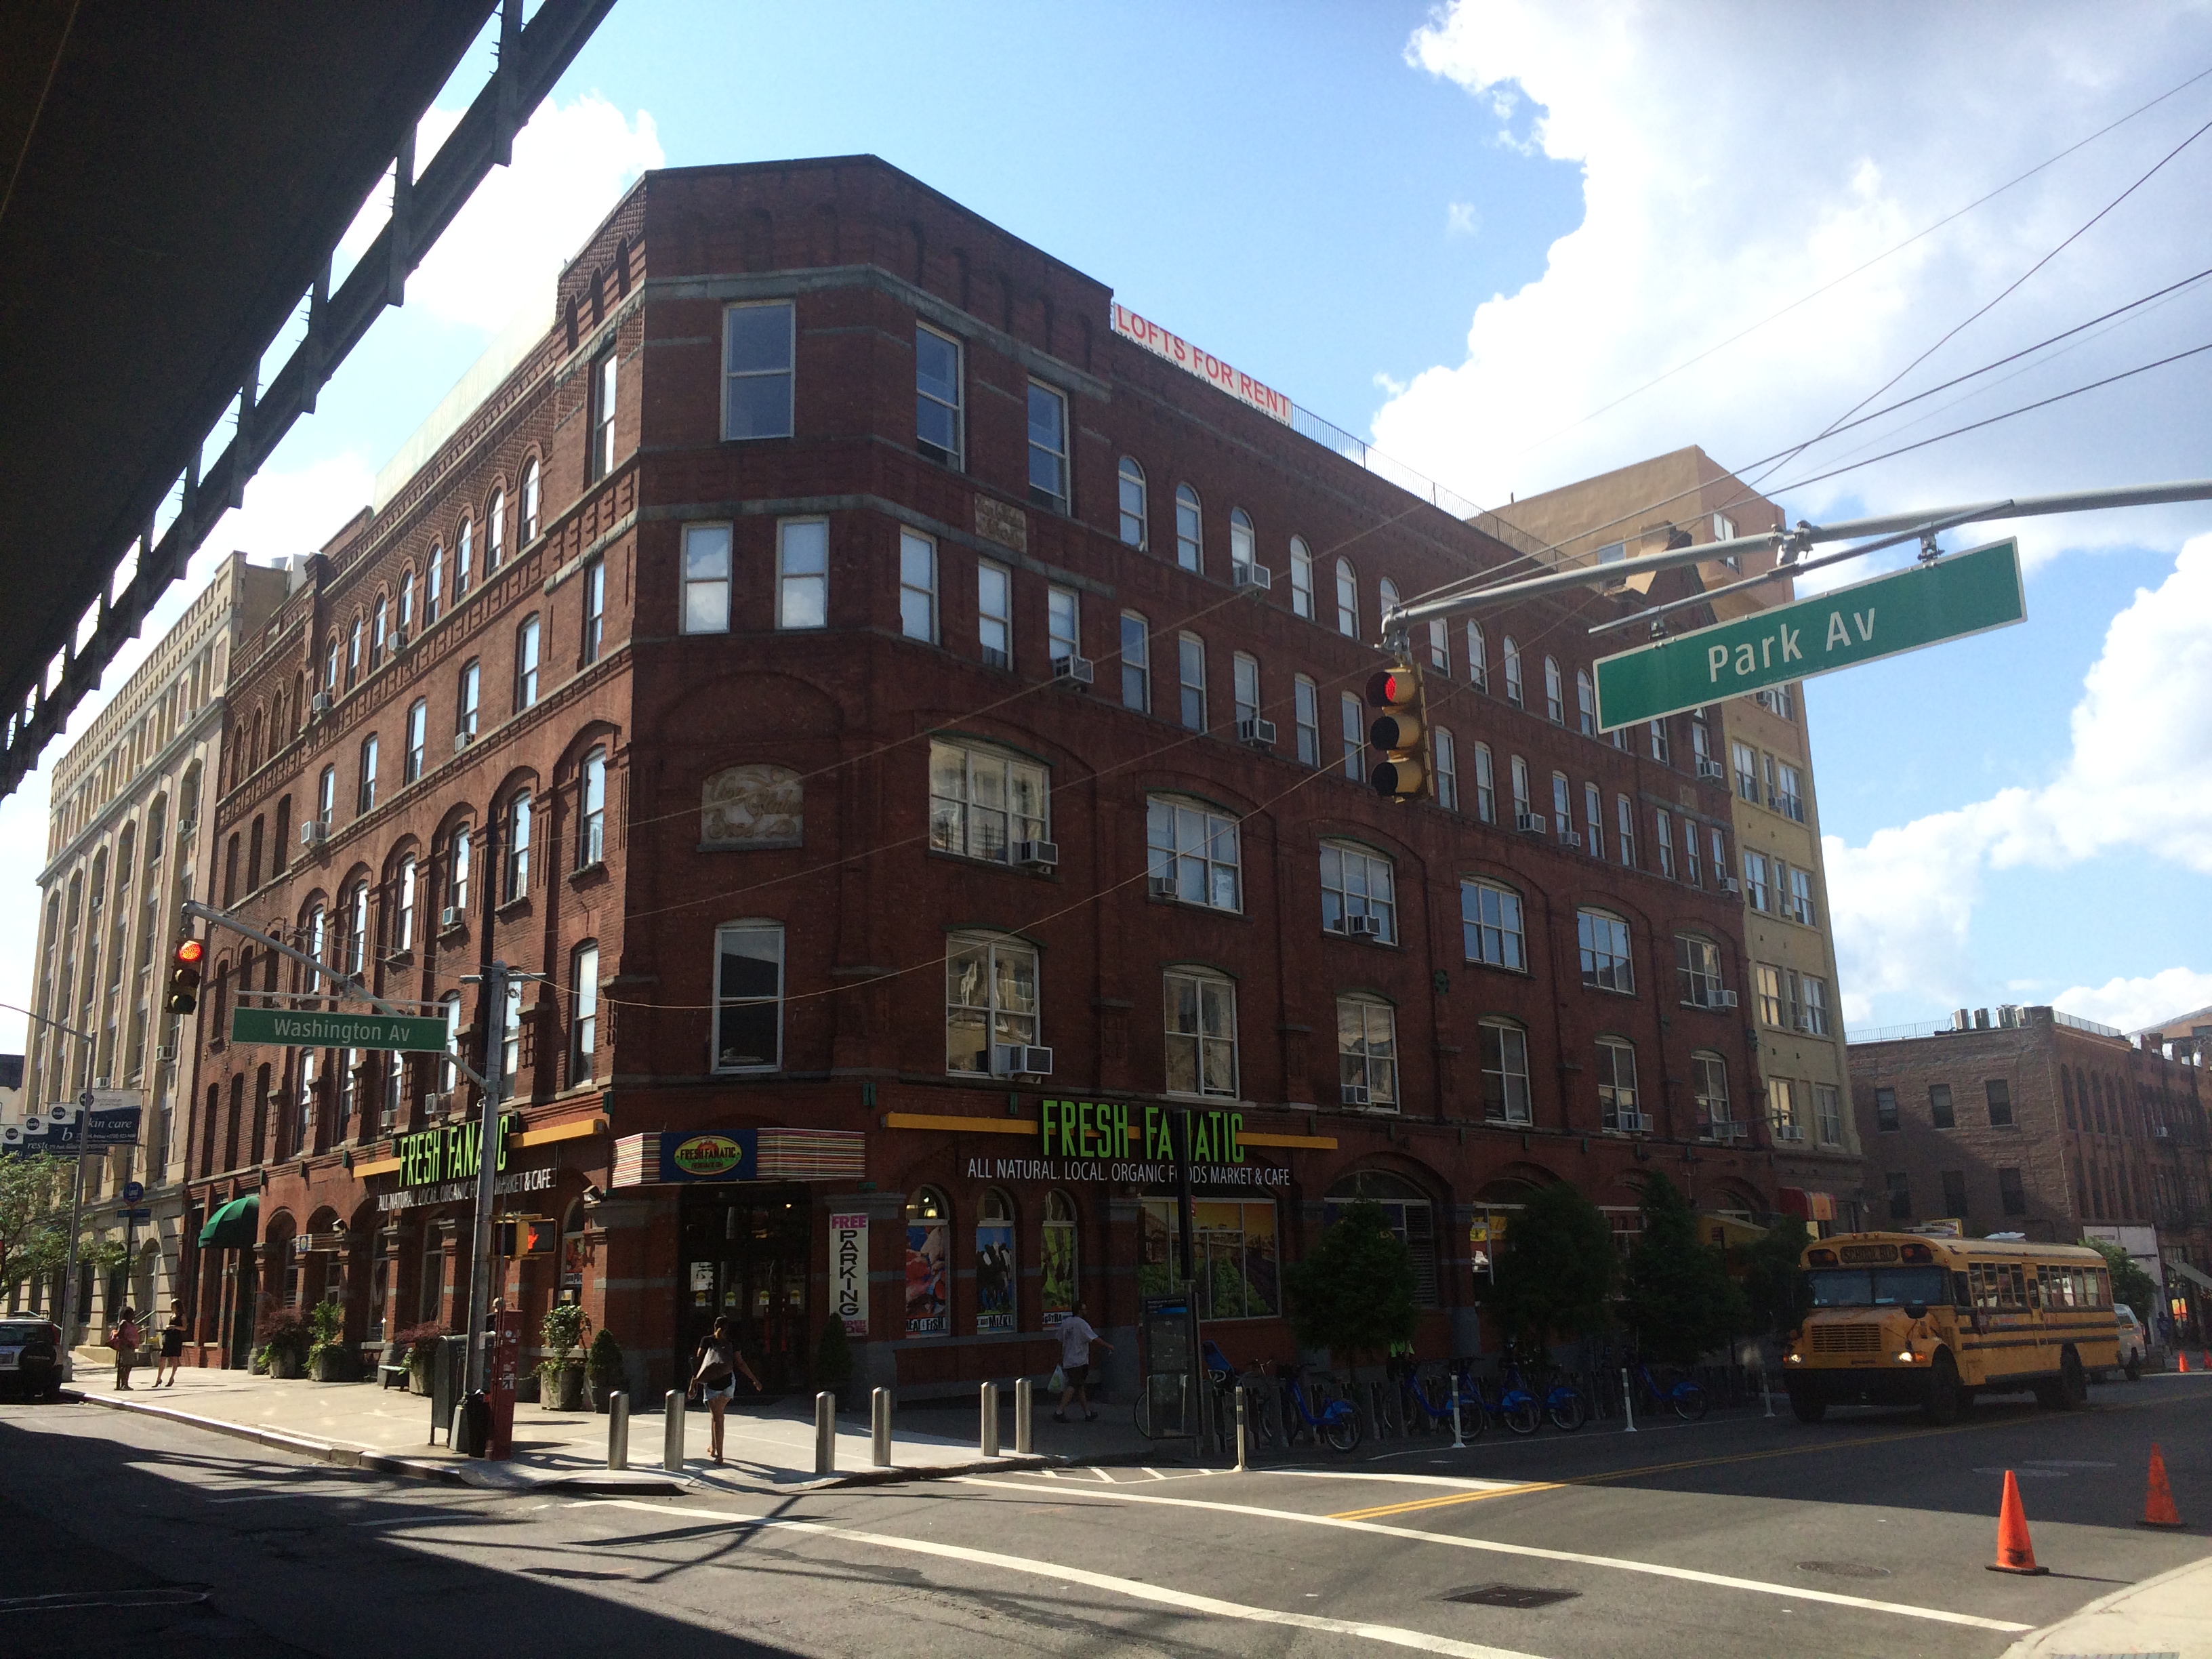 HK, Brickman Pick Up Chocolate Factory Lofts for $68M [Updated ...